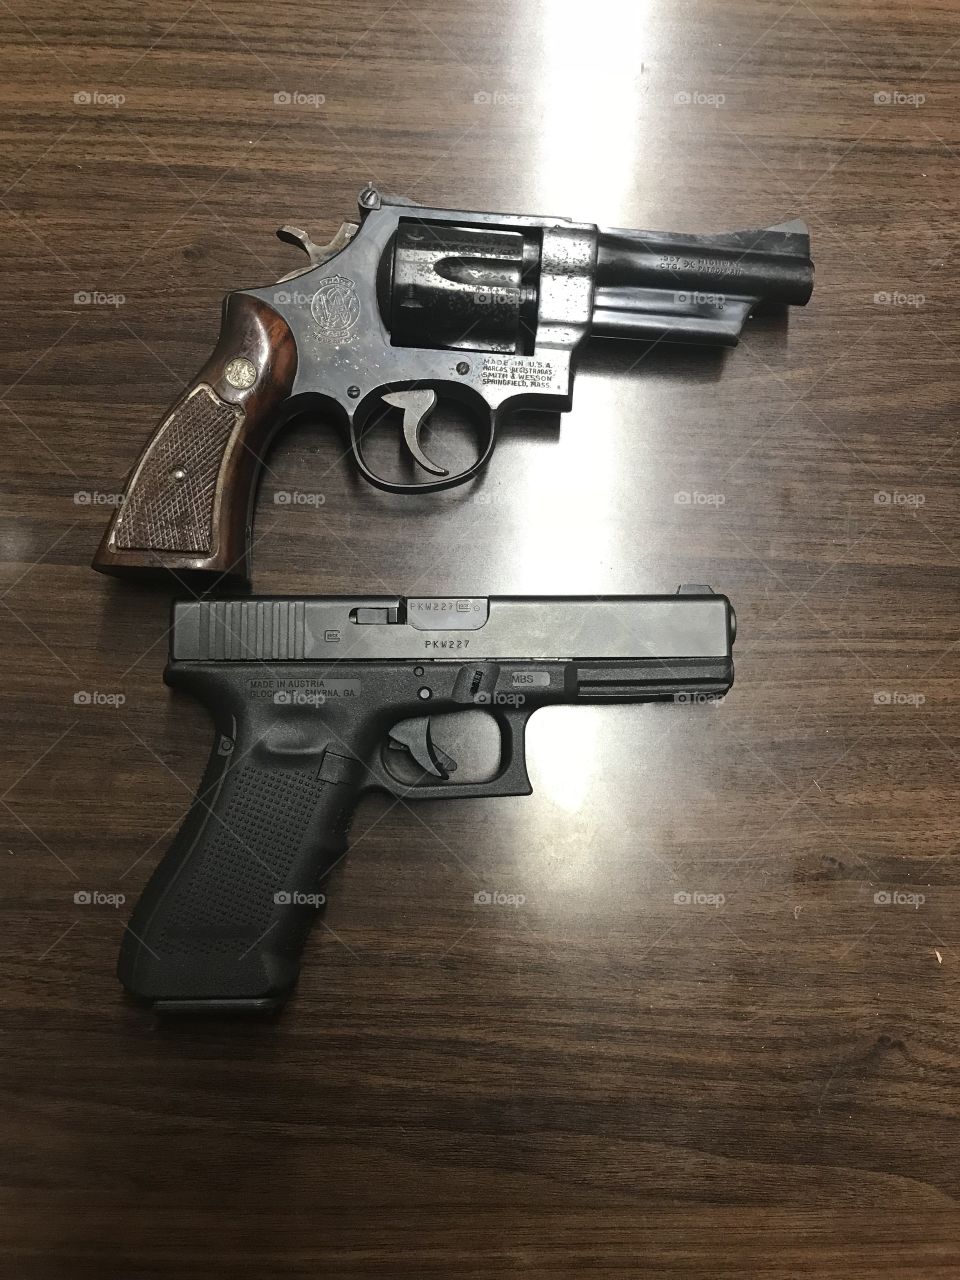 357 Smith and Wesson and Glock 17